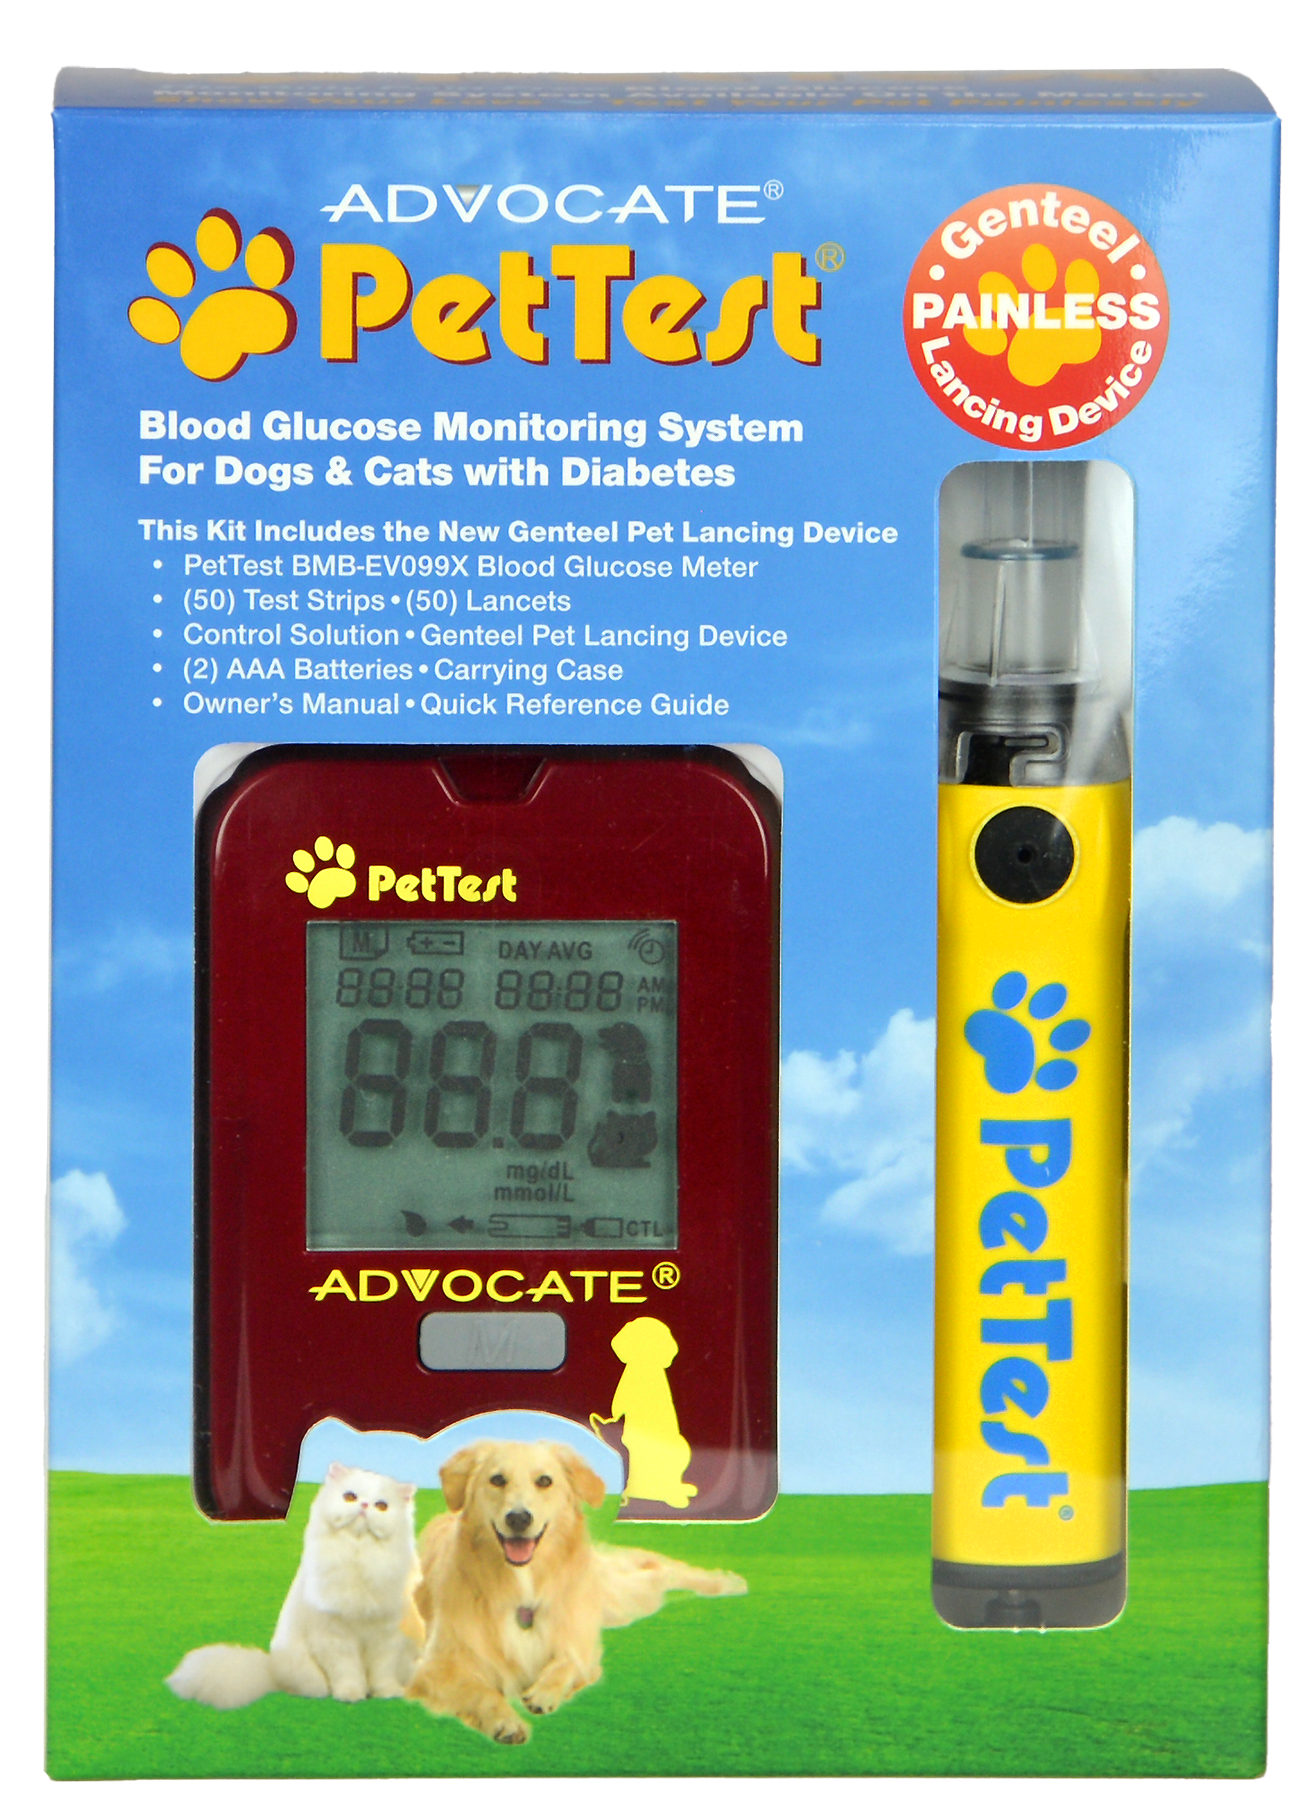 Advocate PetTest Genteel Painless Glucose Monitoring System